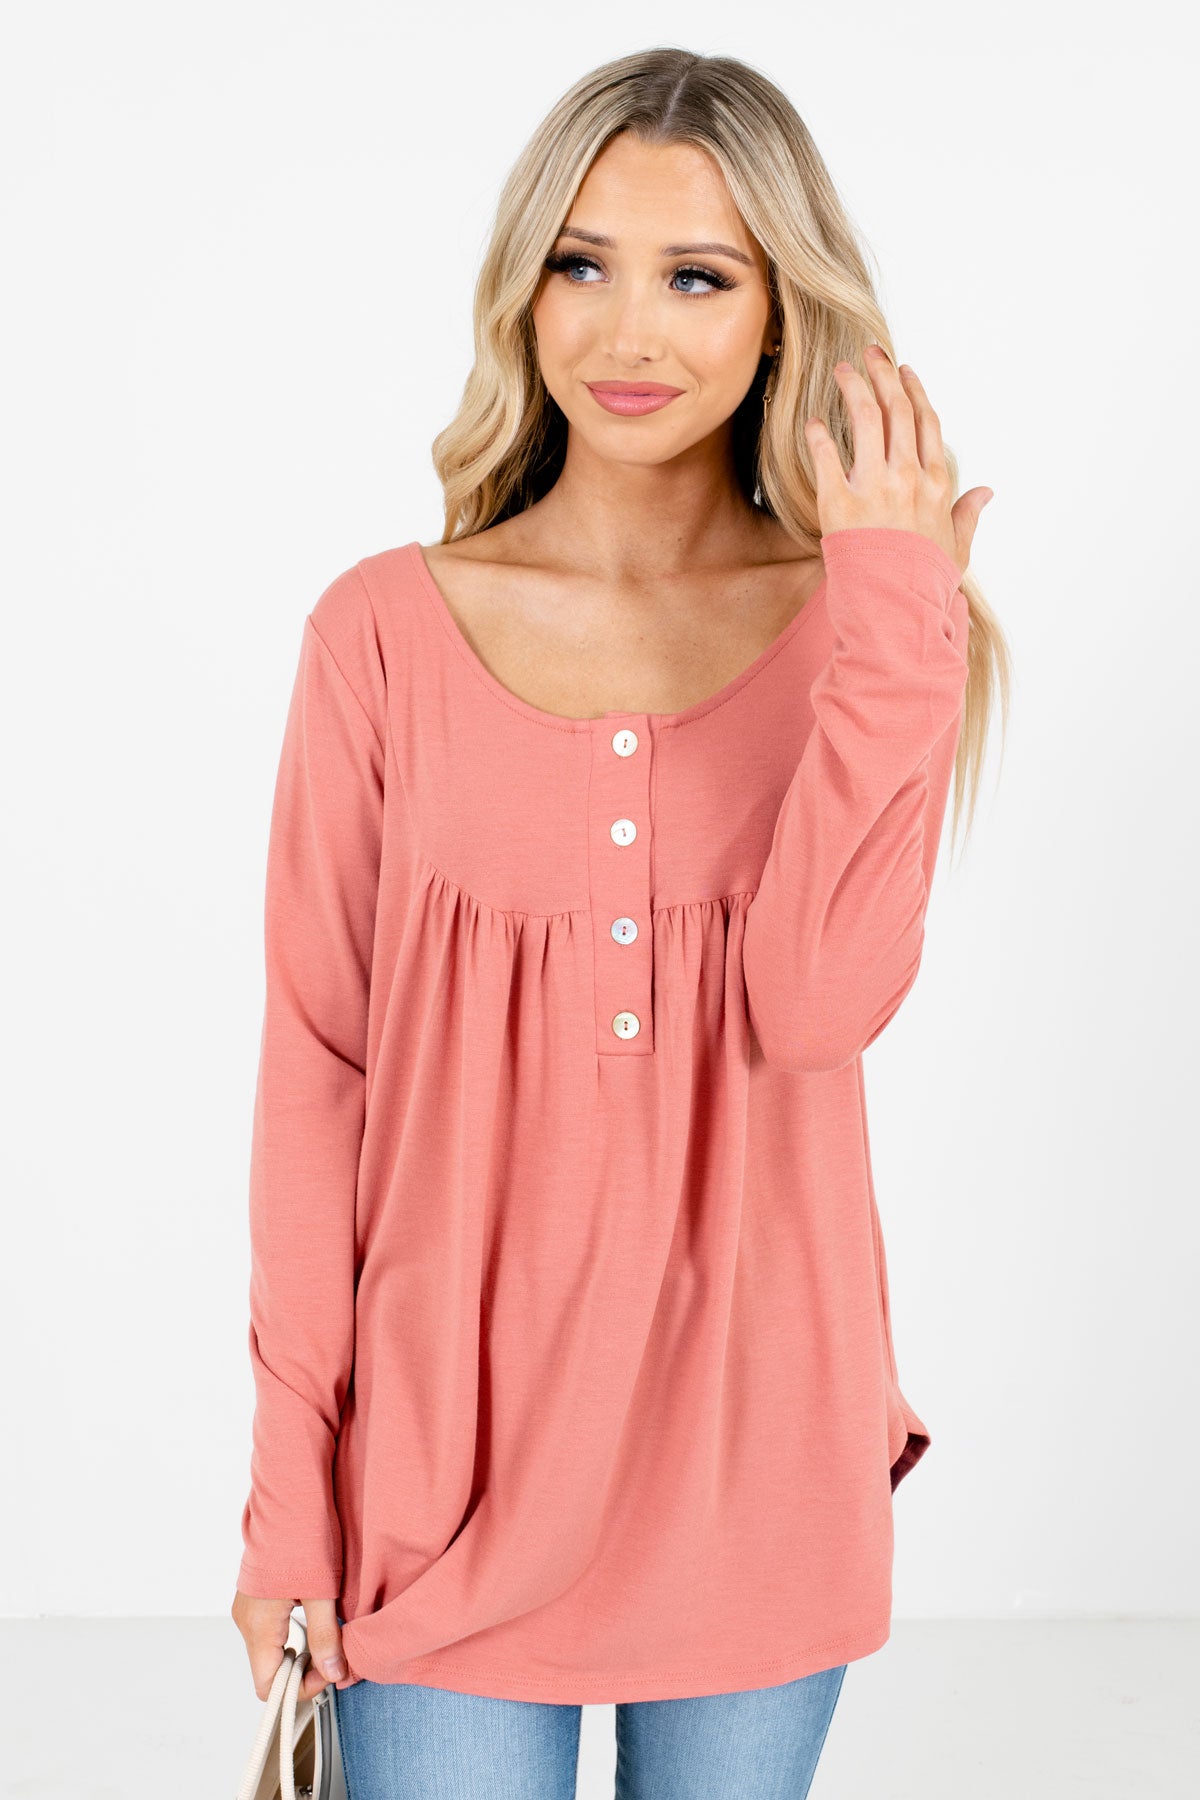 Pink Button-Up Neckline Boutique Tops for Women